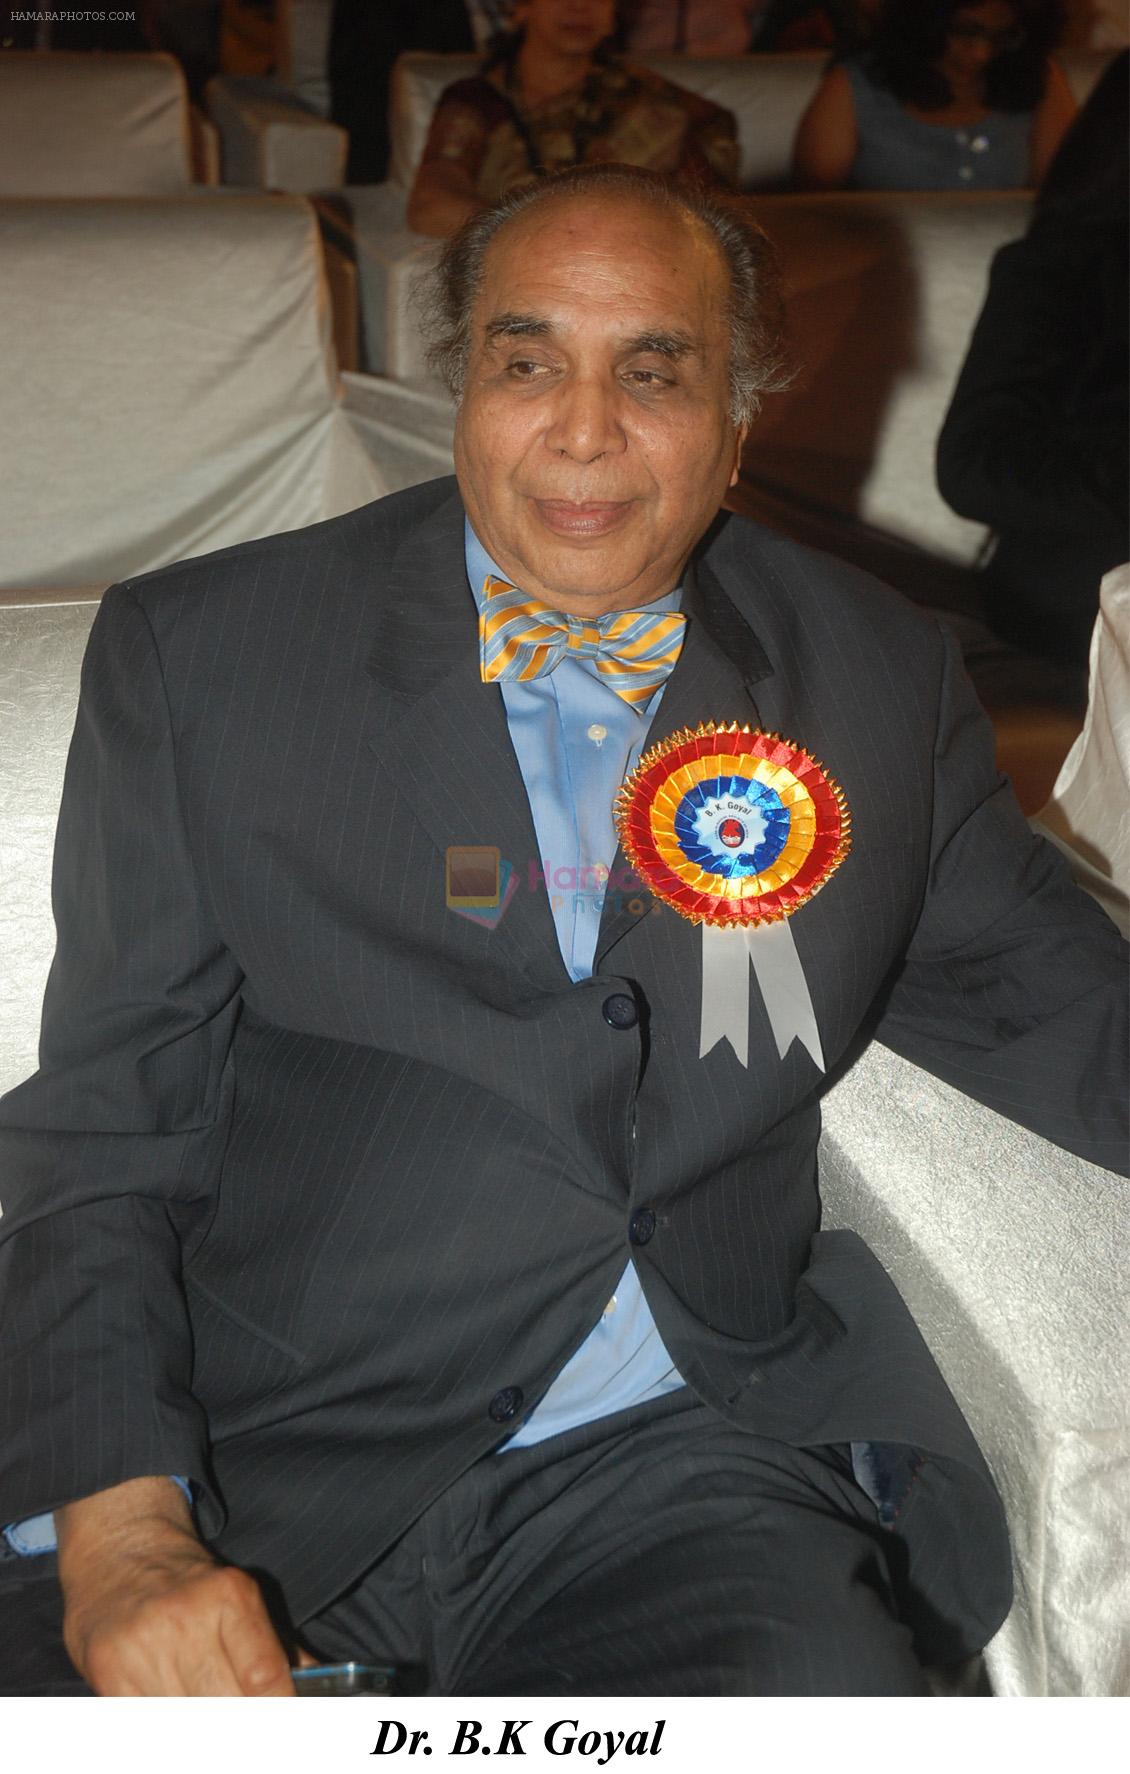 Dr B.K Goyal at the 63rd Annual Conference of Cardiological Society of India in NCPA complex, Mumbai on 9th Dec 2011